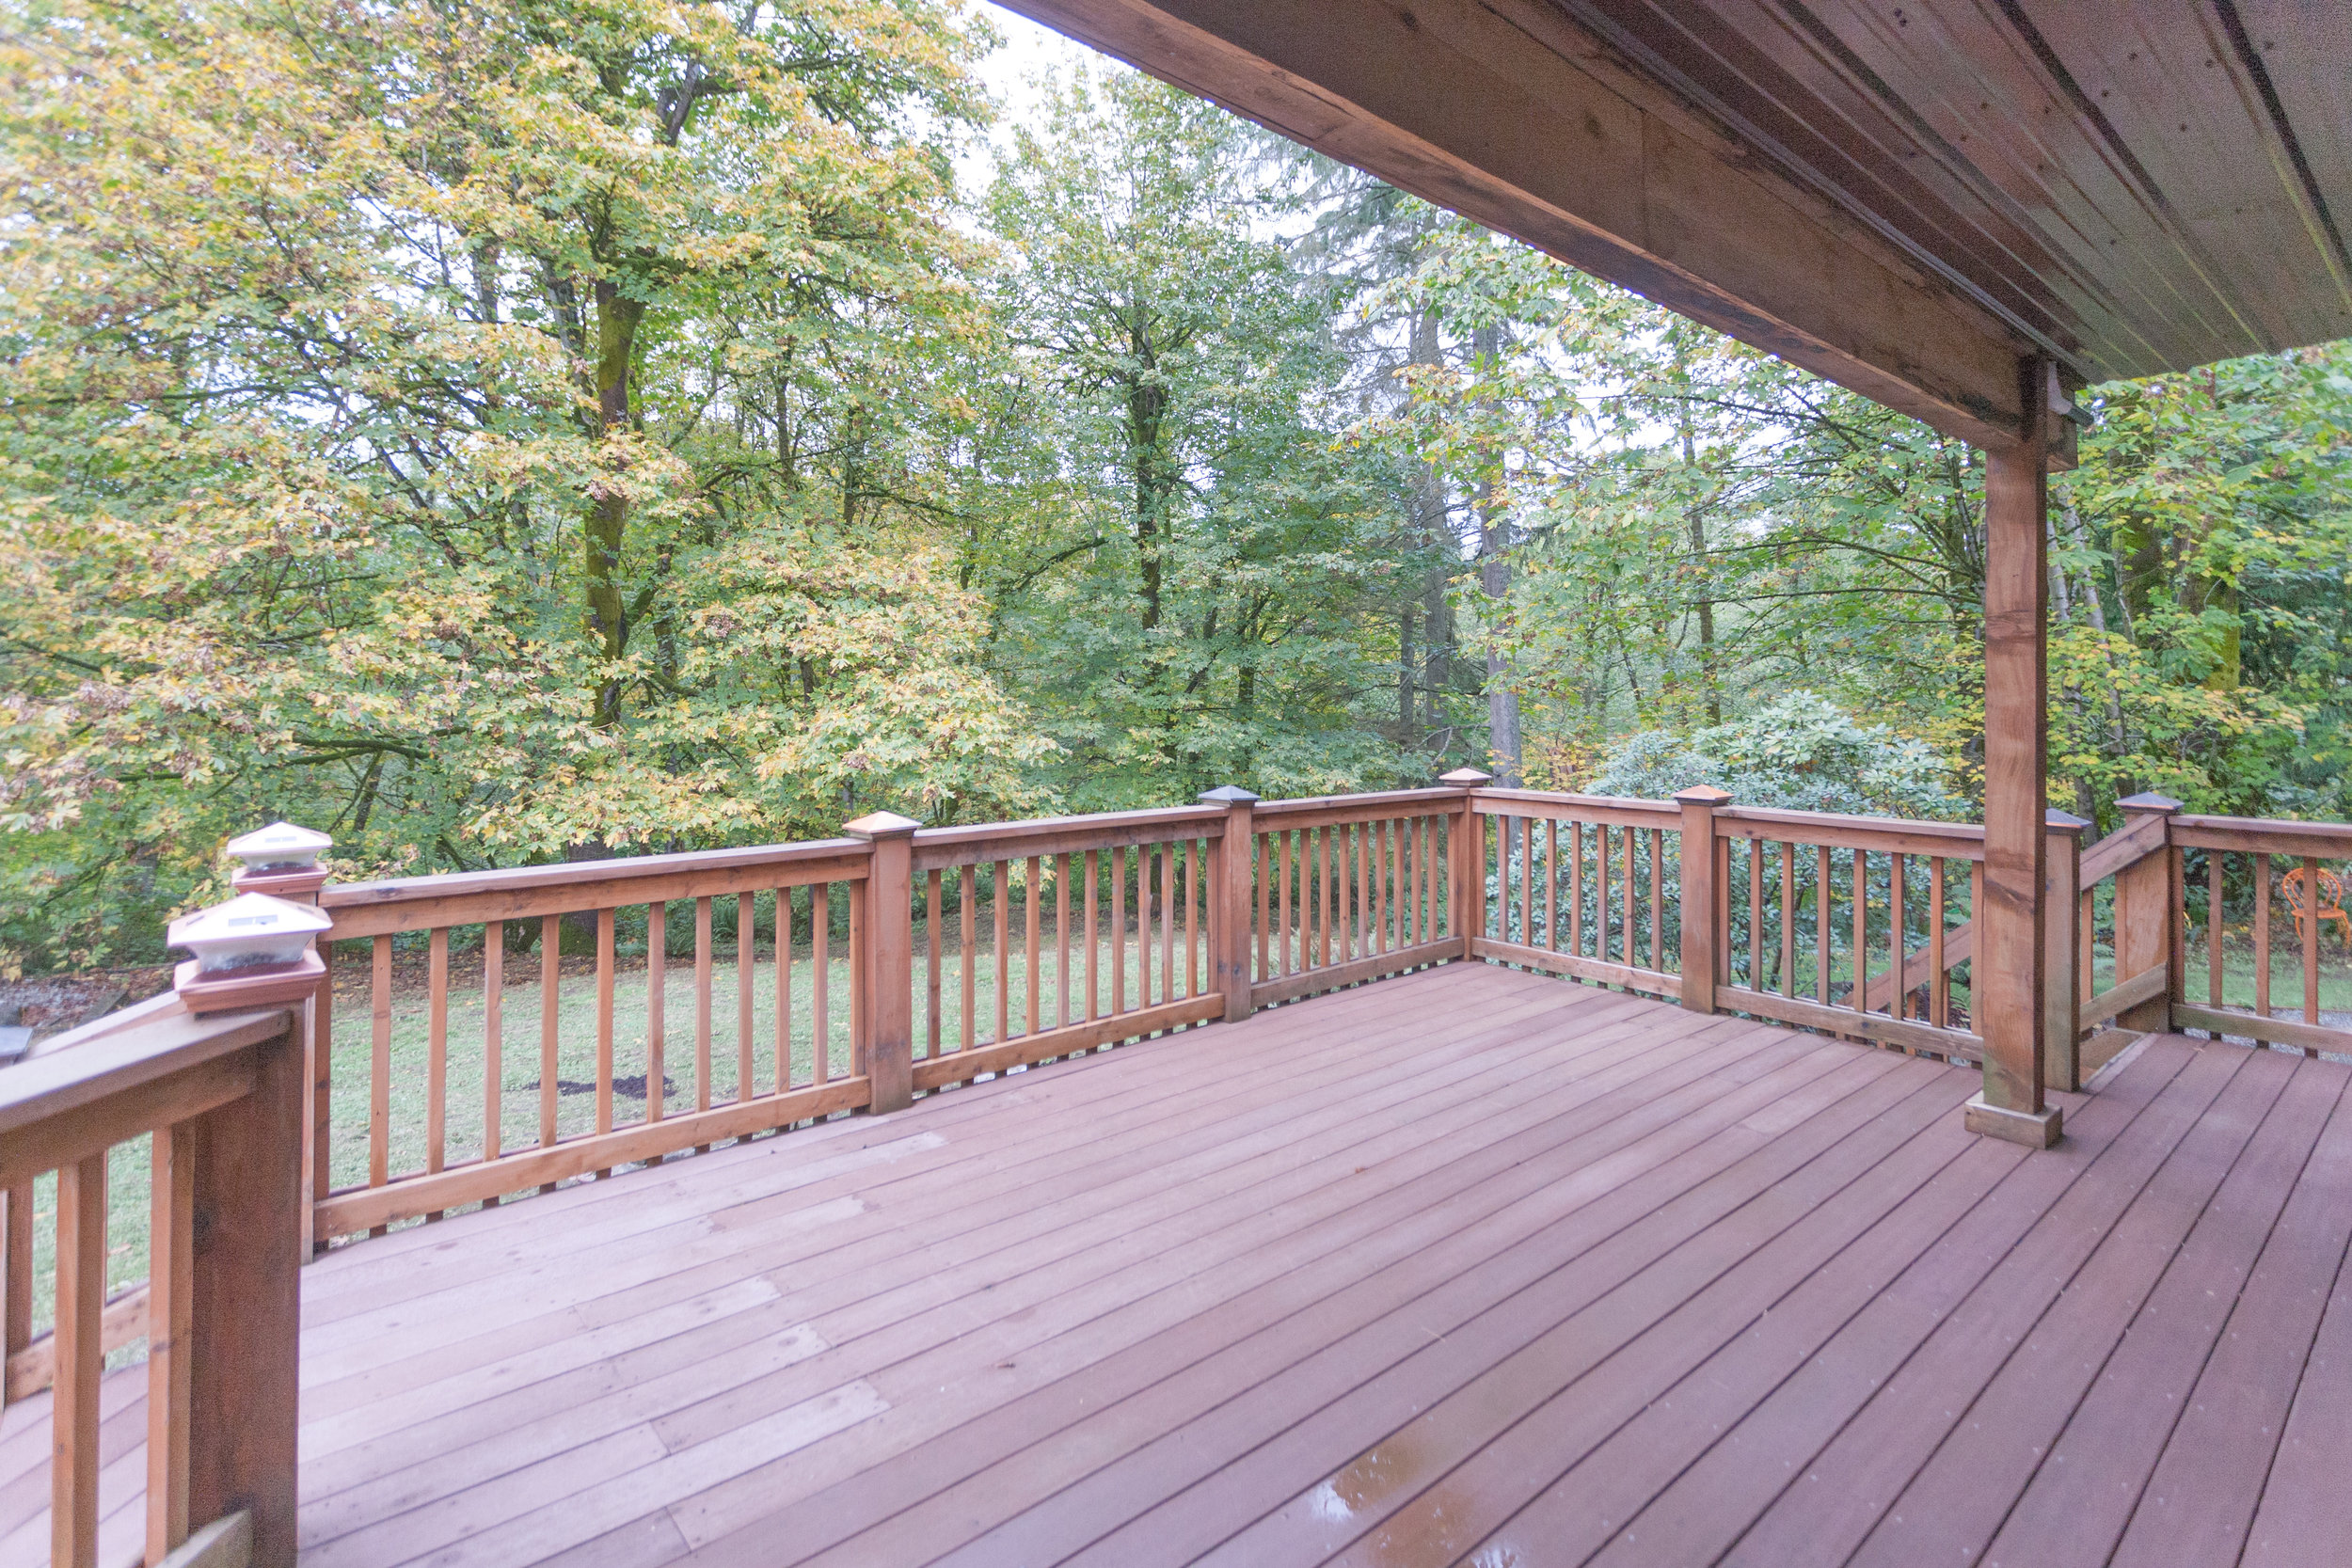  New Trex deck looks out on the greenest of green spaces. The estate is so private you can't see a single neighbor. 